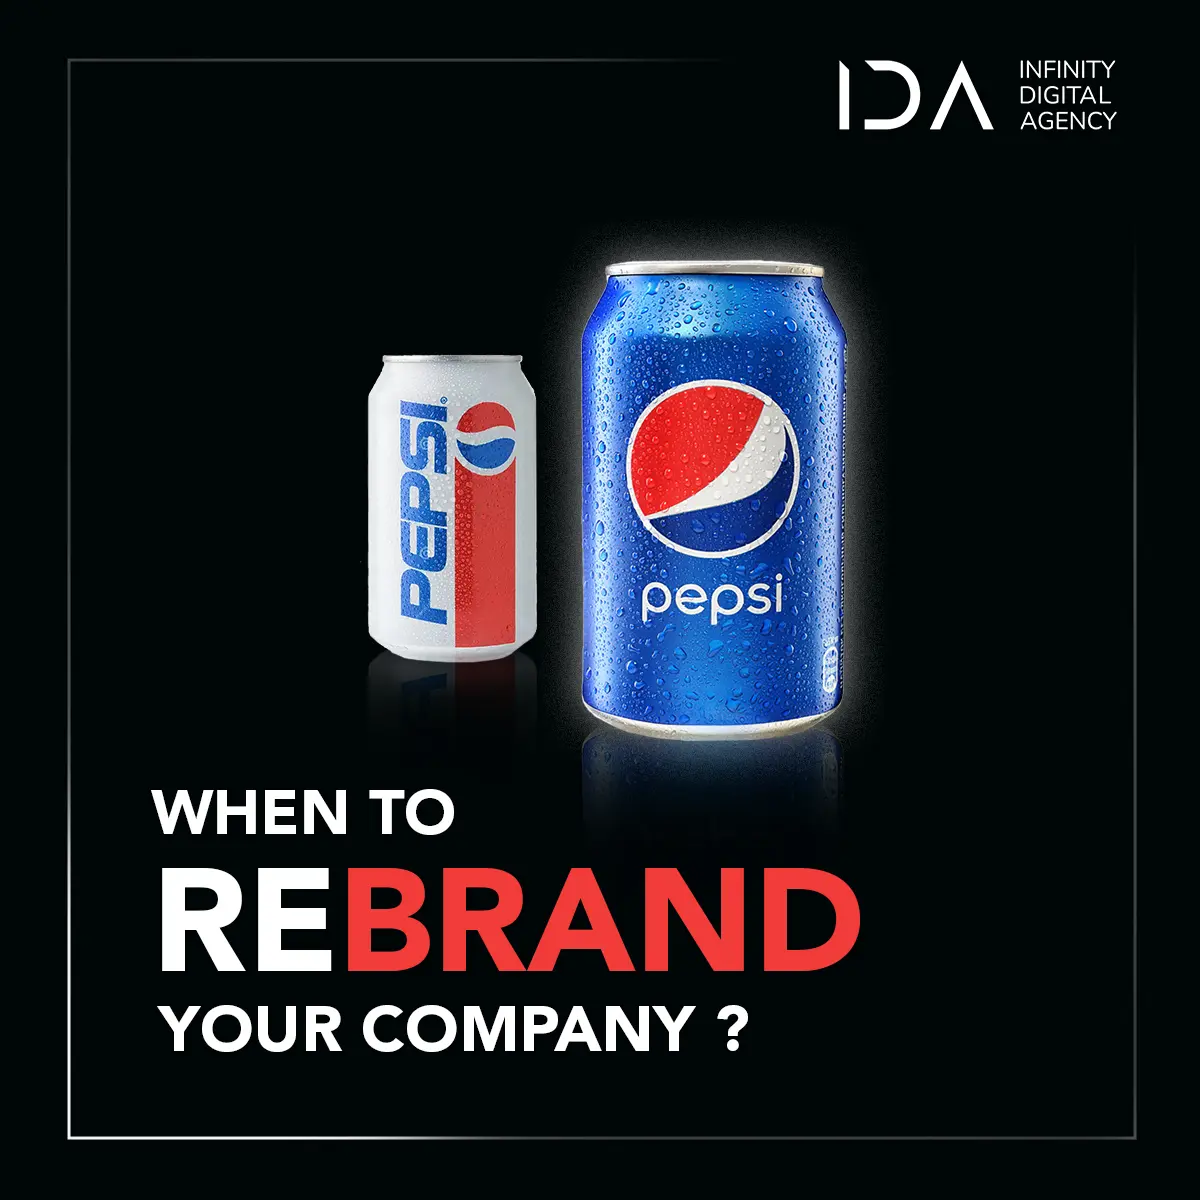 WHEN TO REBRAND YOUR COMPANY?